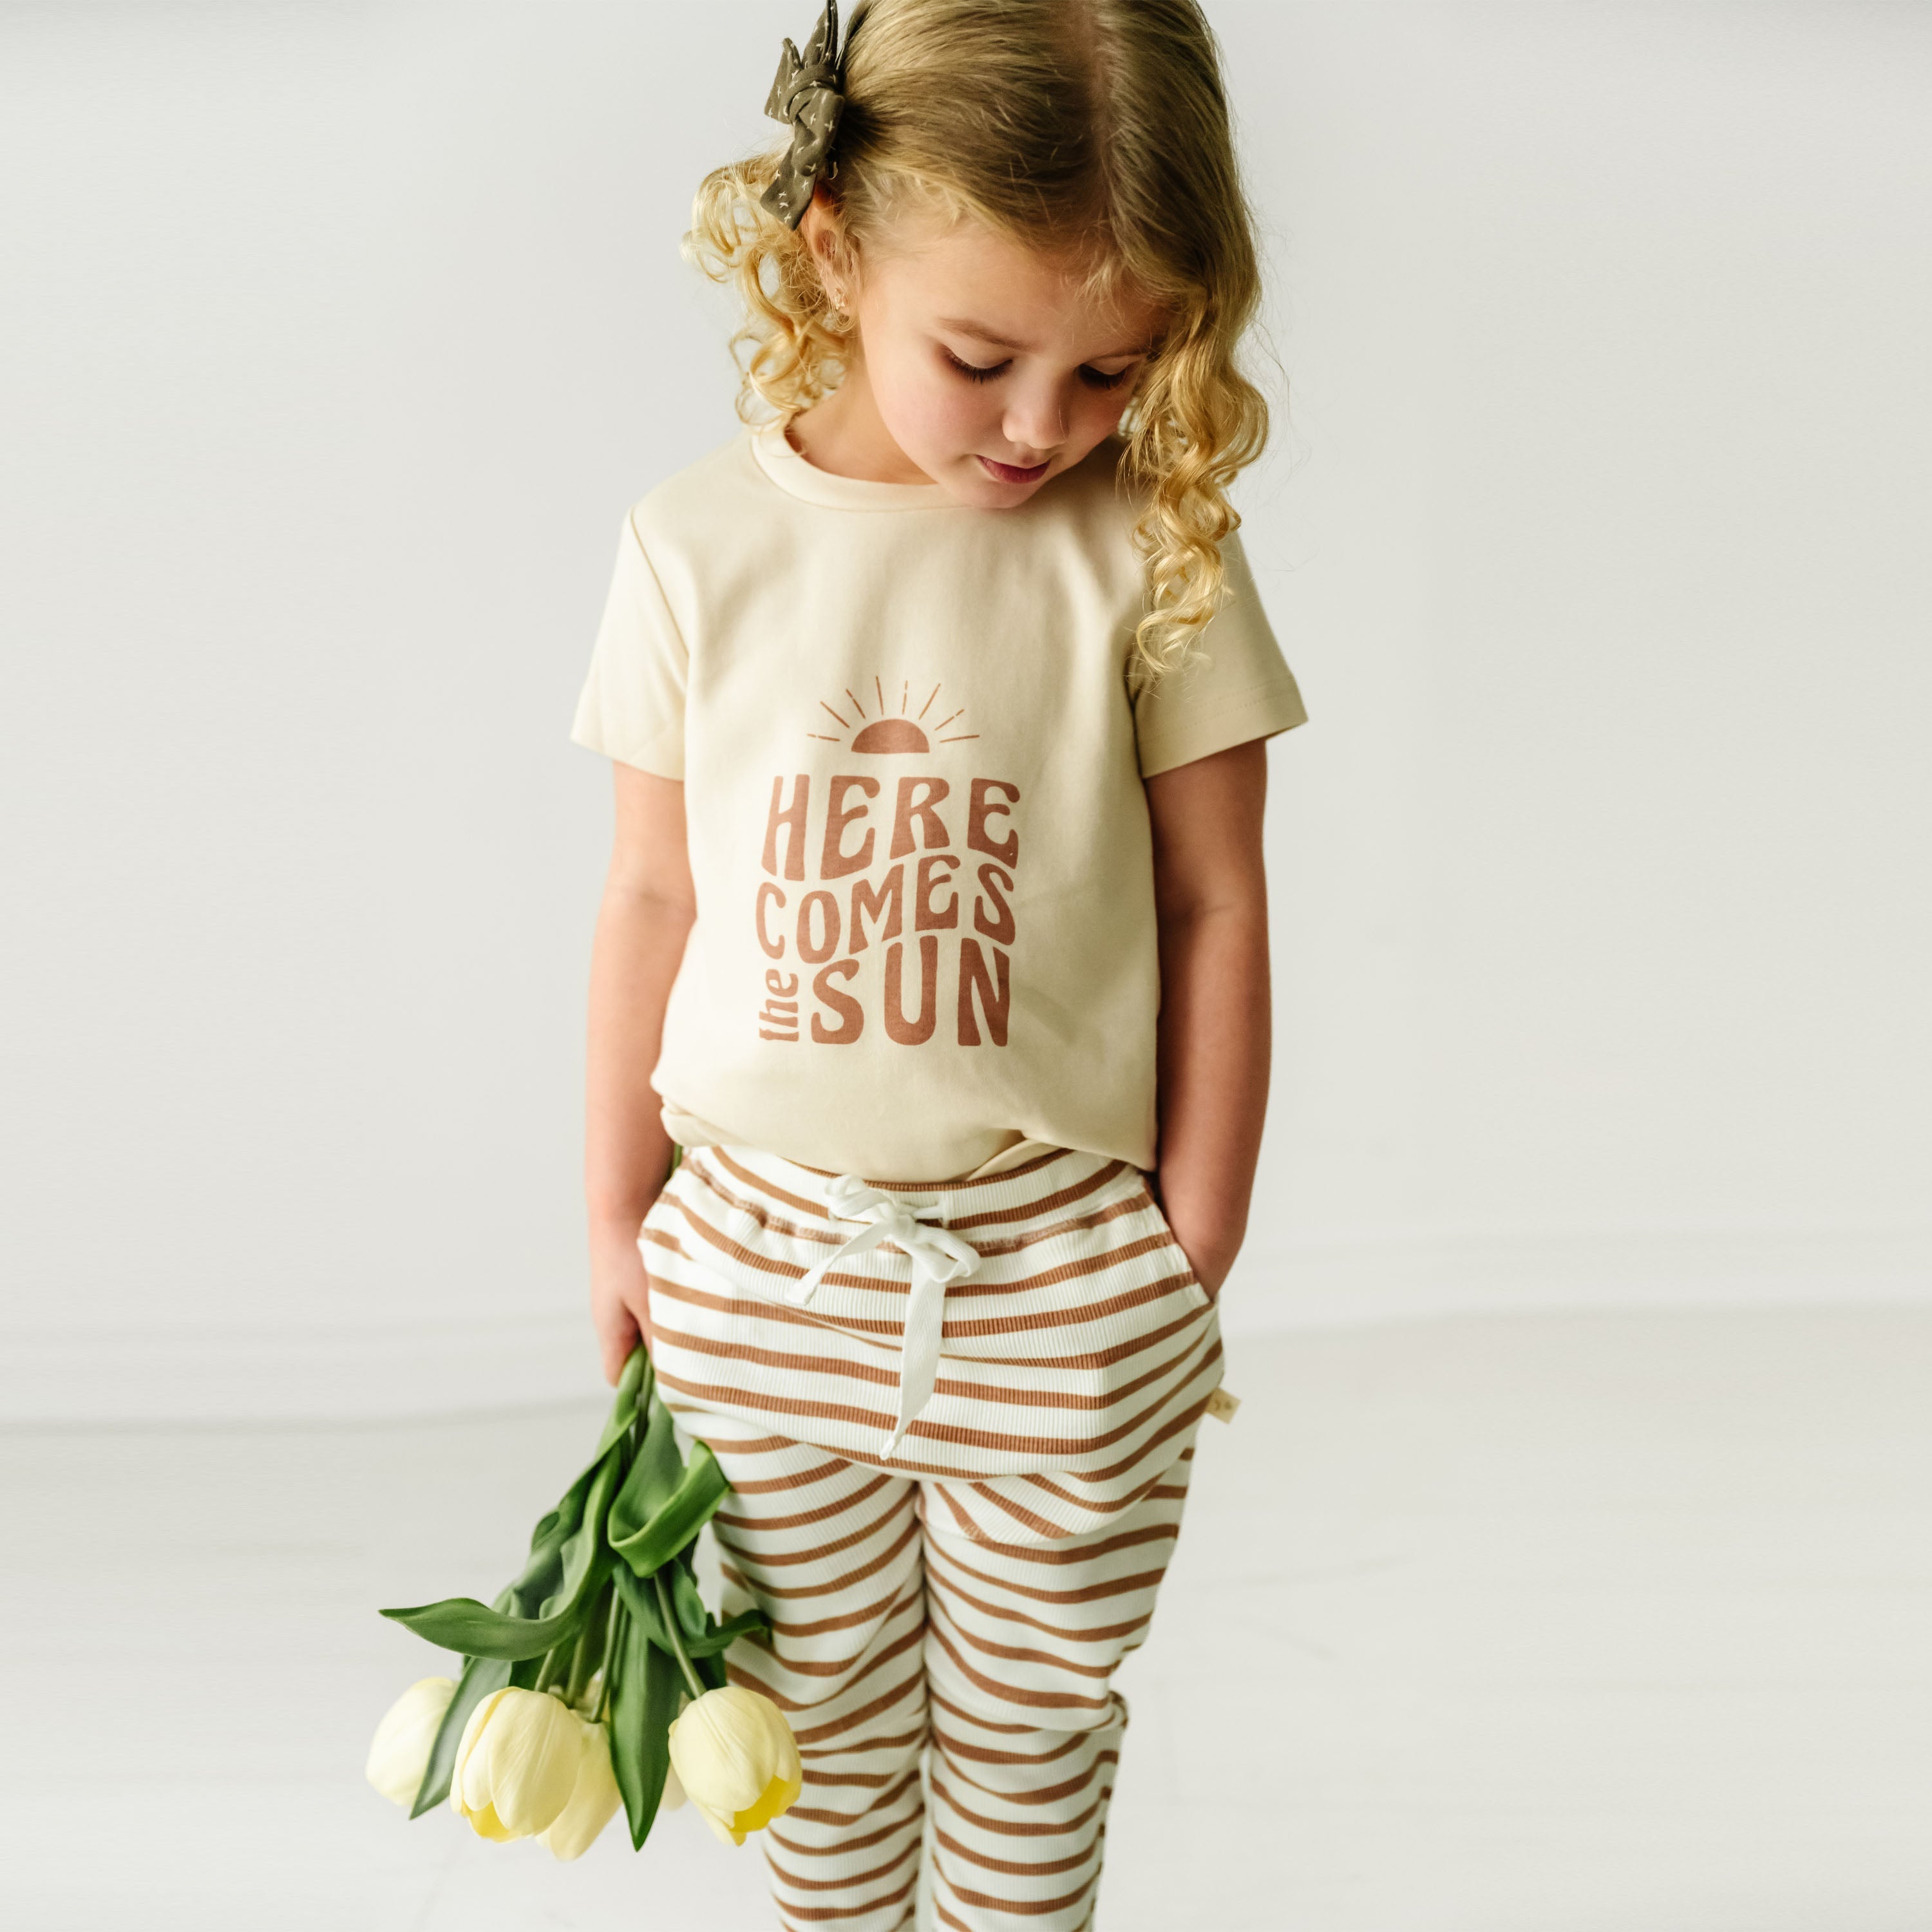 A toddler with curly blonde hair, wearing a Makemake Organics Organic Crew Neck Tee - Here Comes The Sun and striped pants, looks down at a bunch of yellow tulips she is holding.